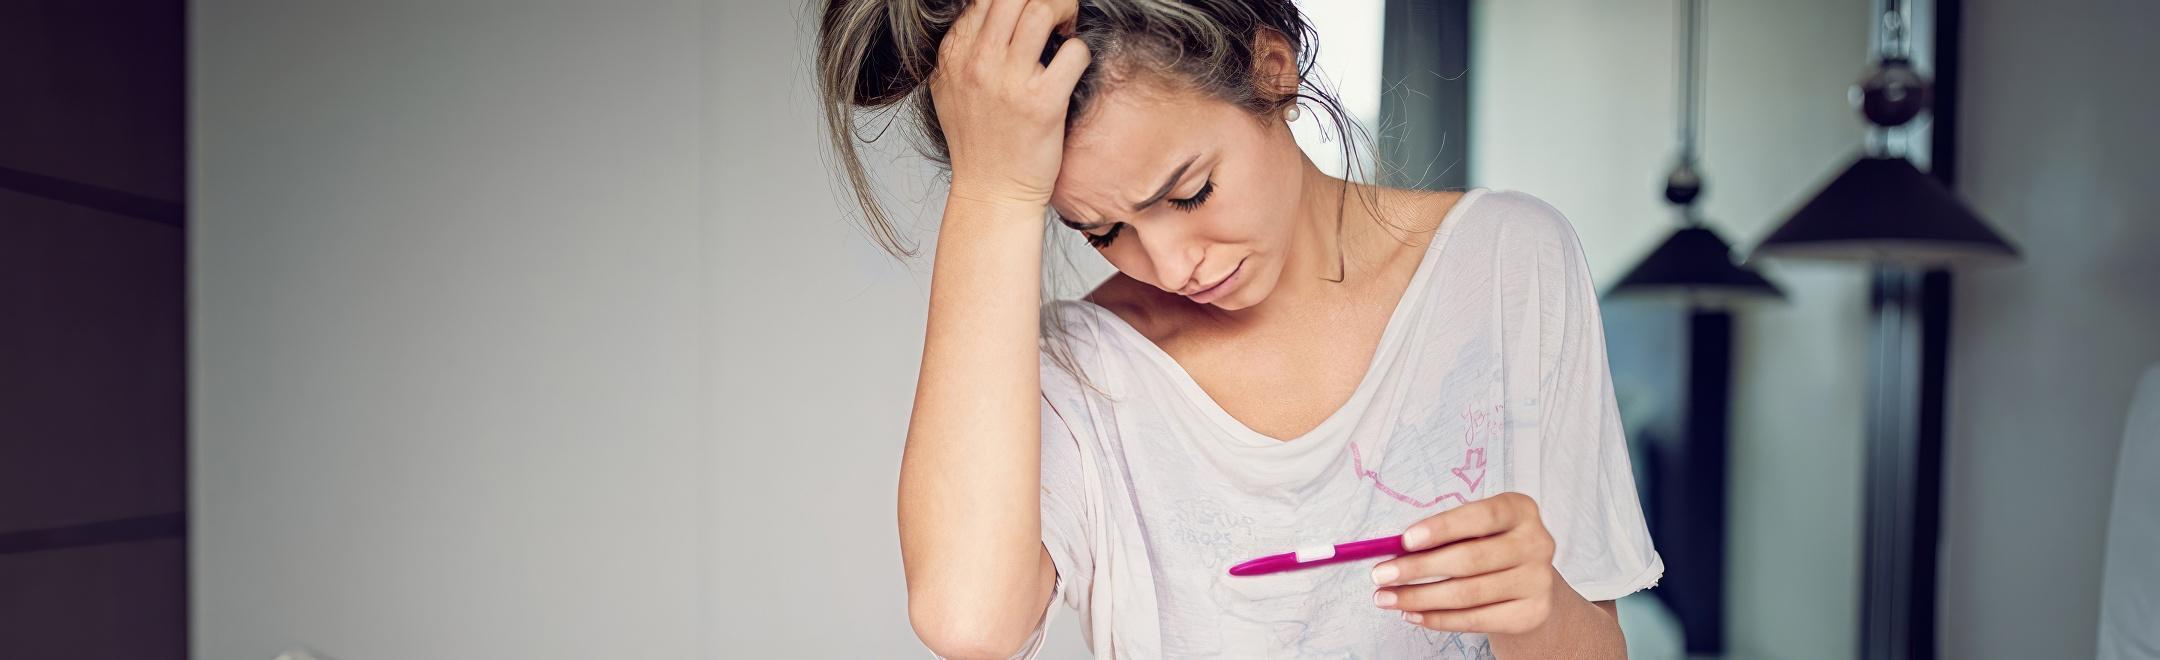 Teen girl stressed about a pregnancy test. What if I find out I'm pregnant?